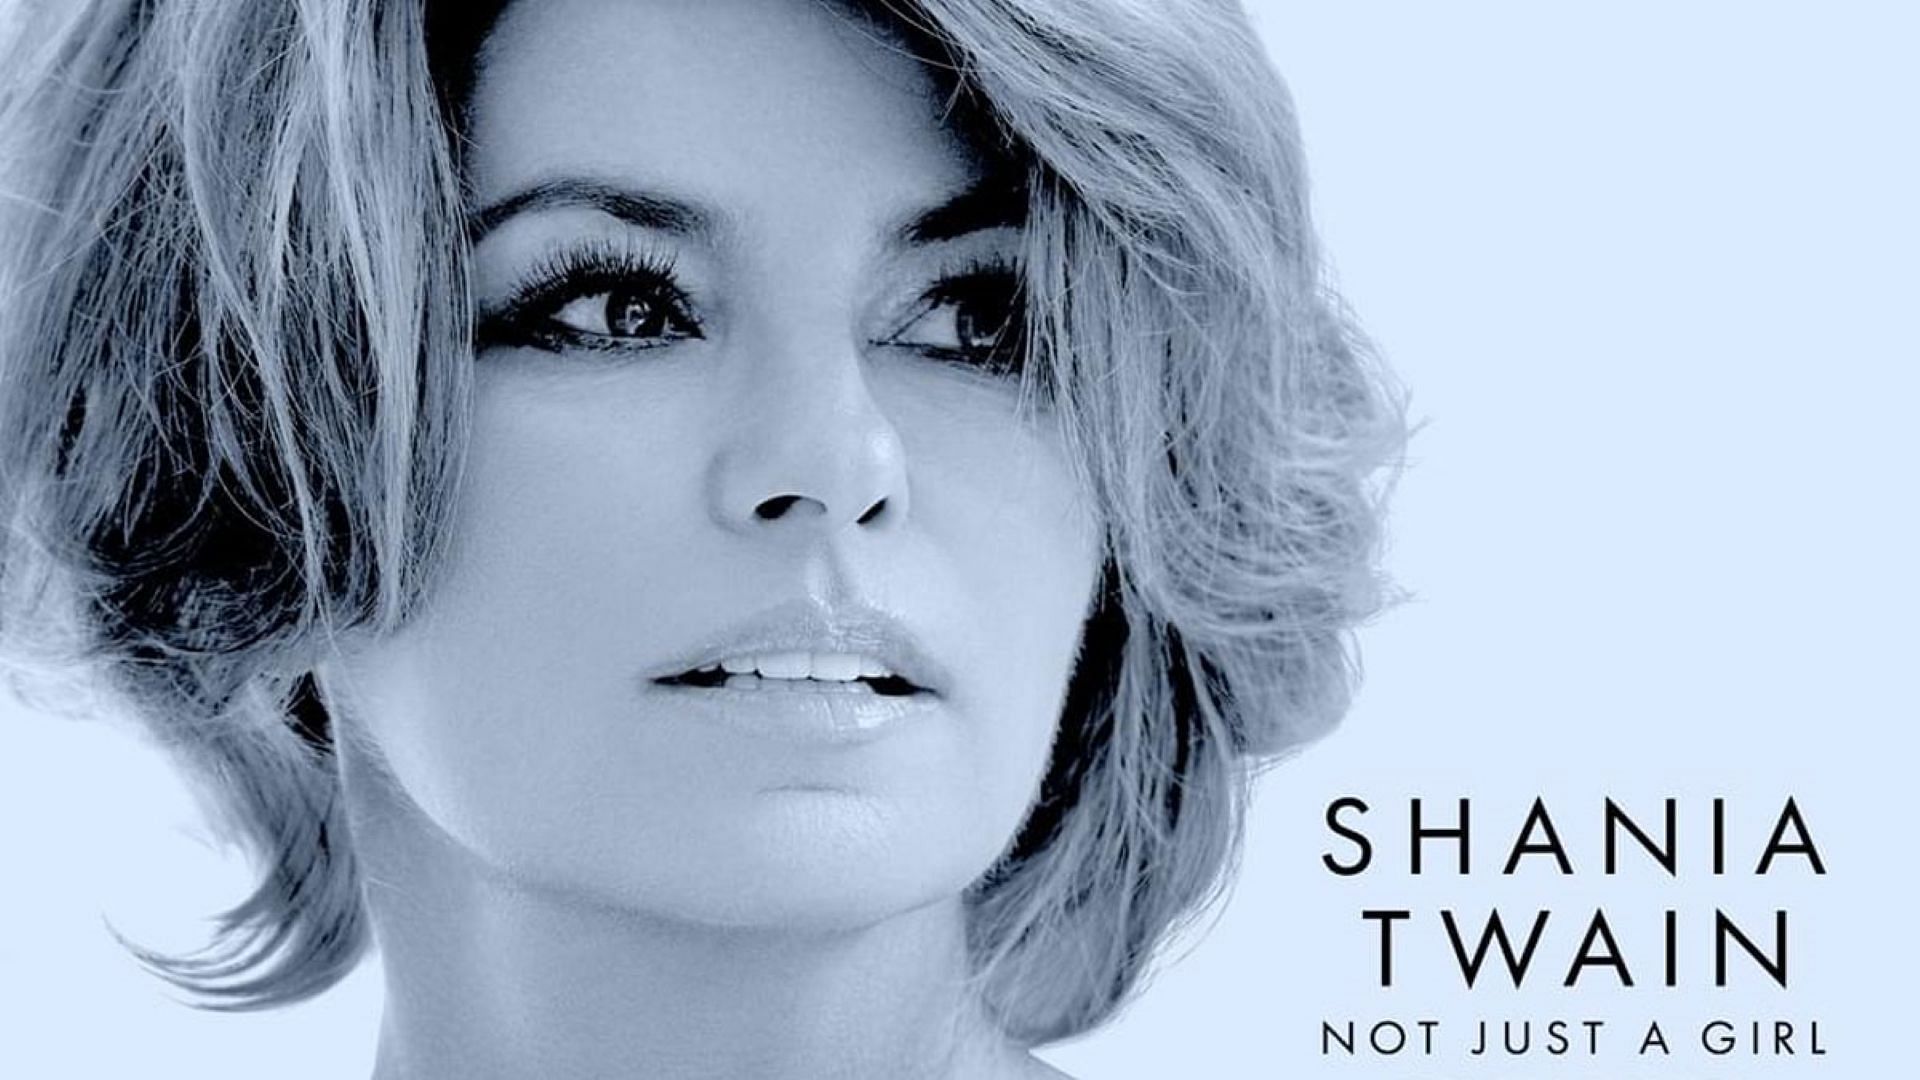 The poster for Shania Twain: Not Just a Girl (Image via Netflix)